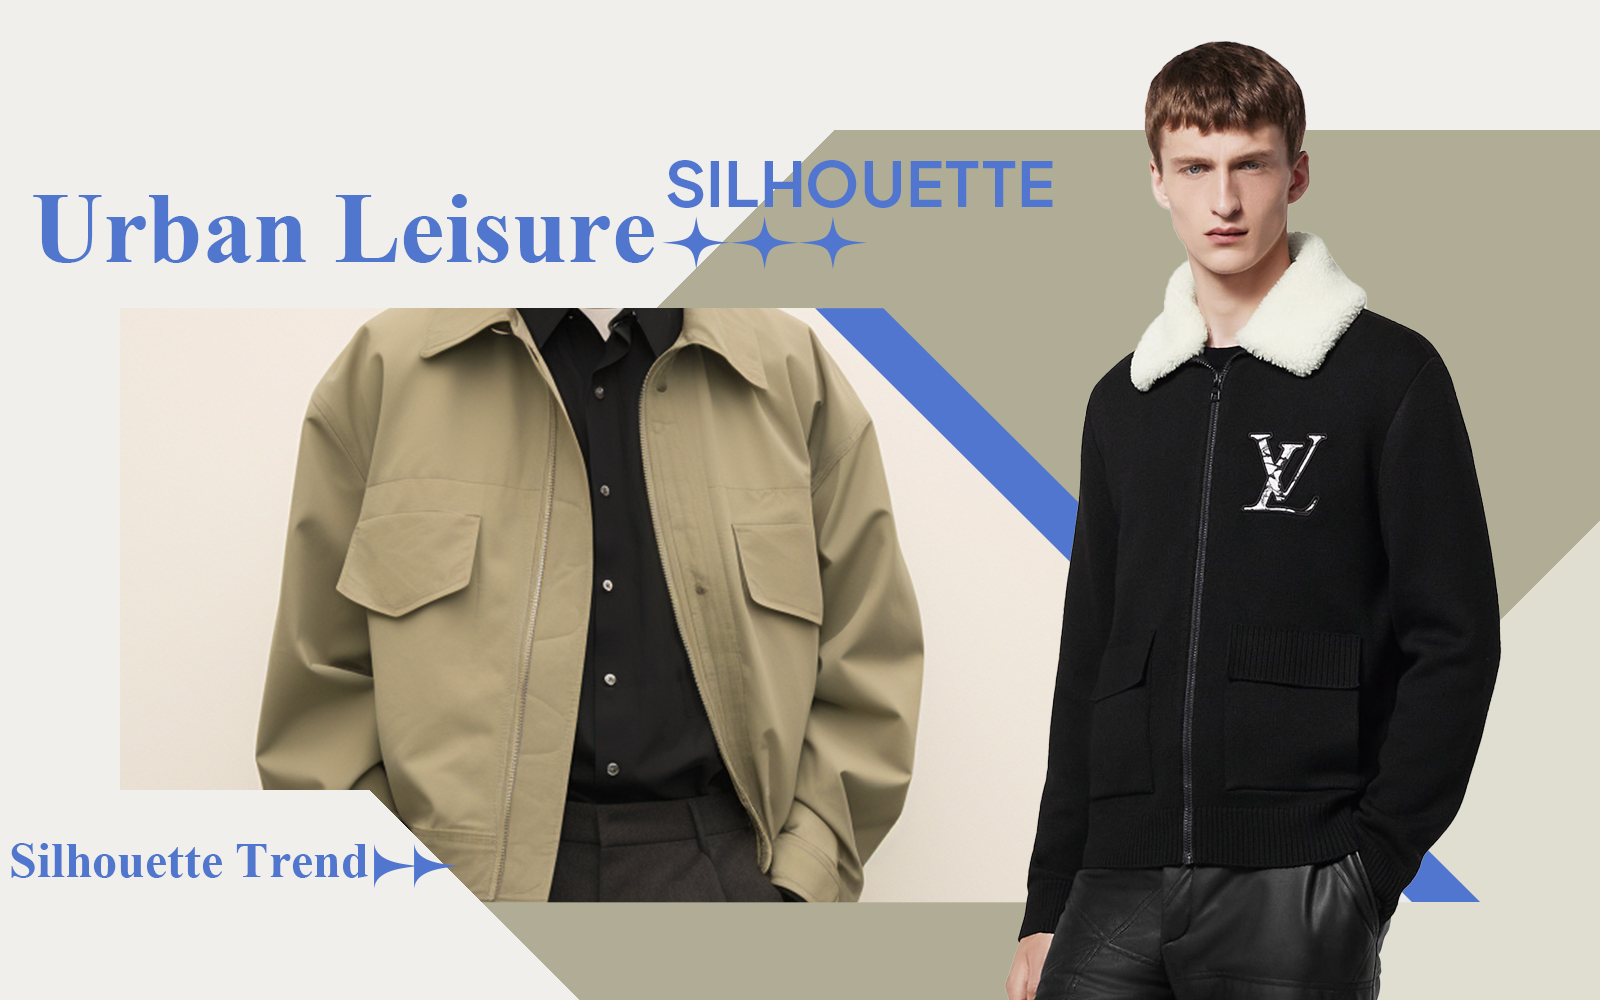 Urban Leisure -- The Silhouette Trend for Men's Jacket